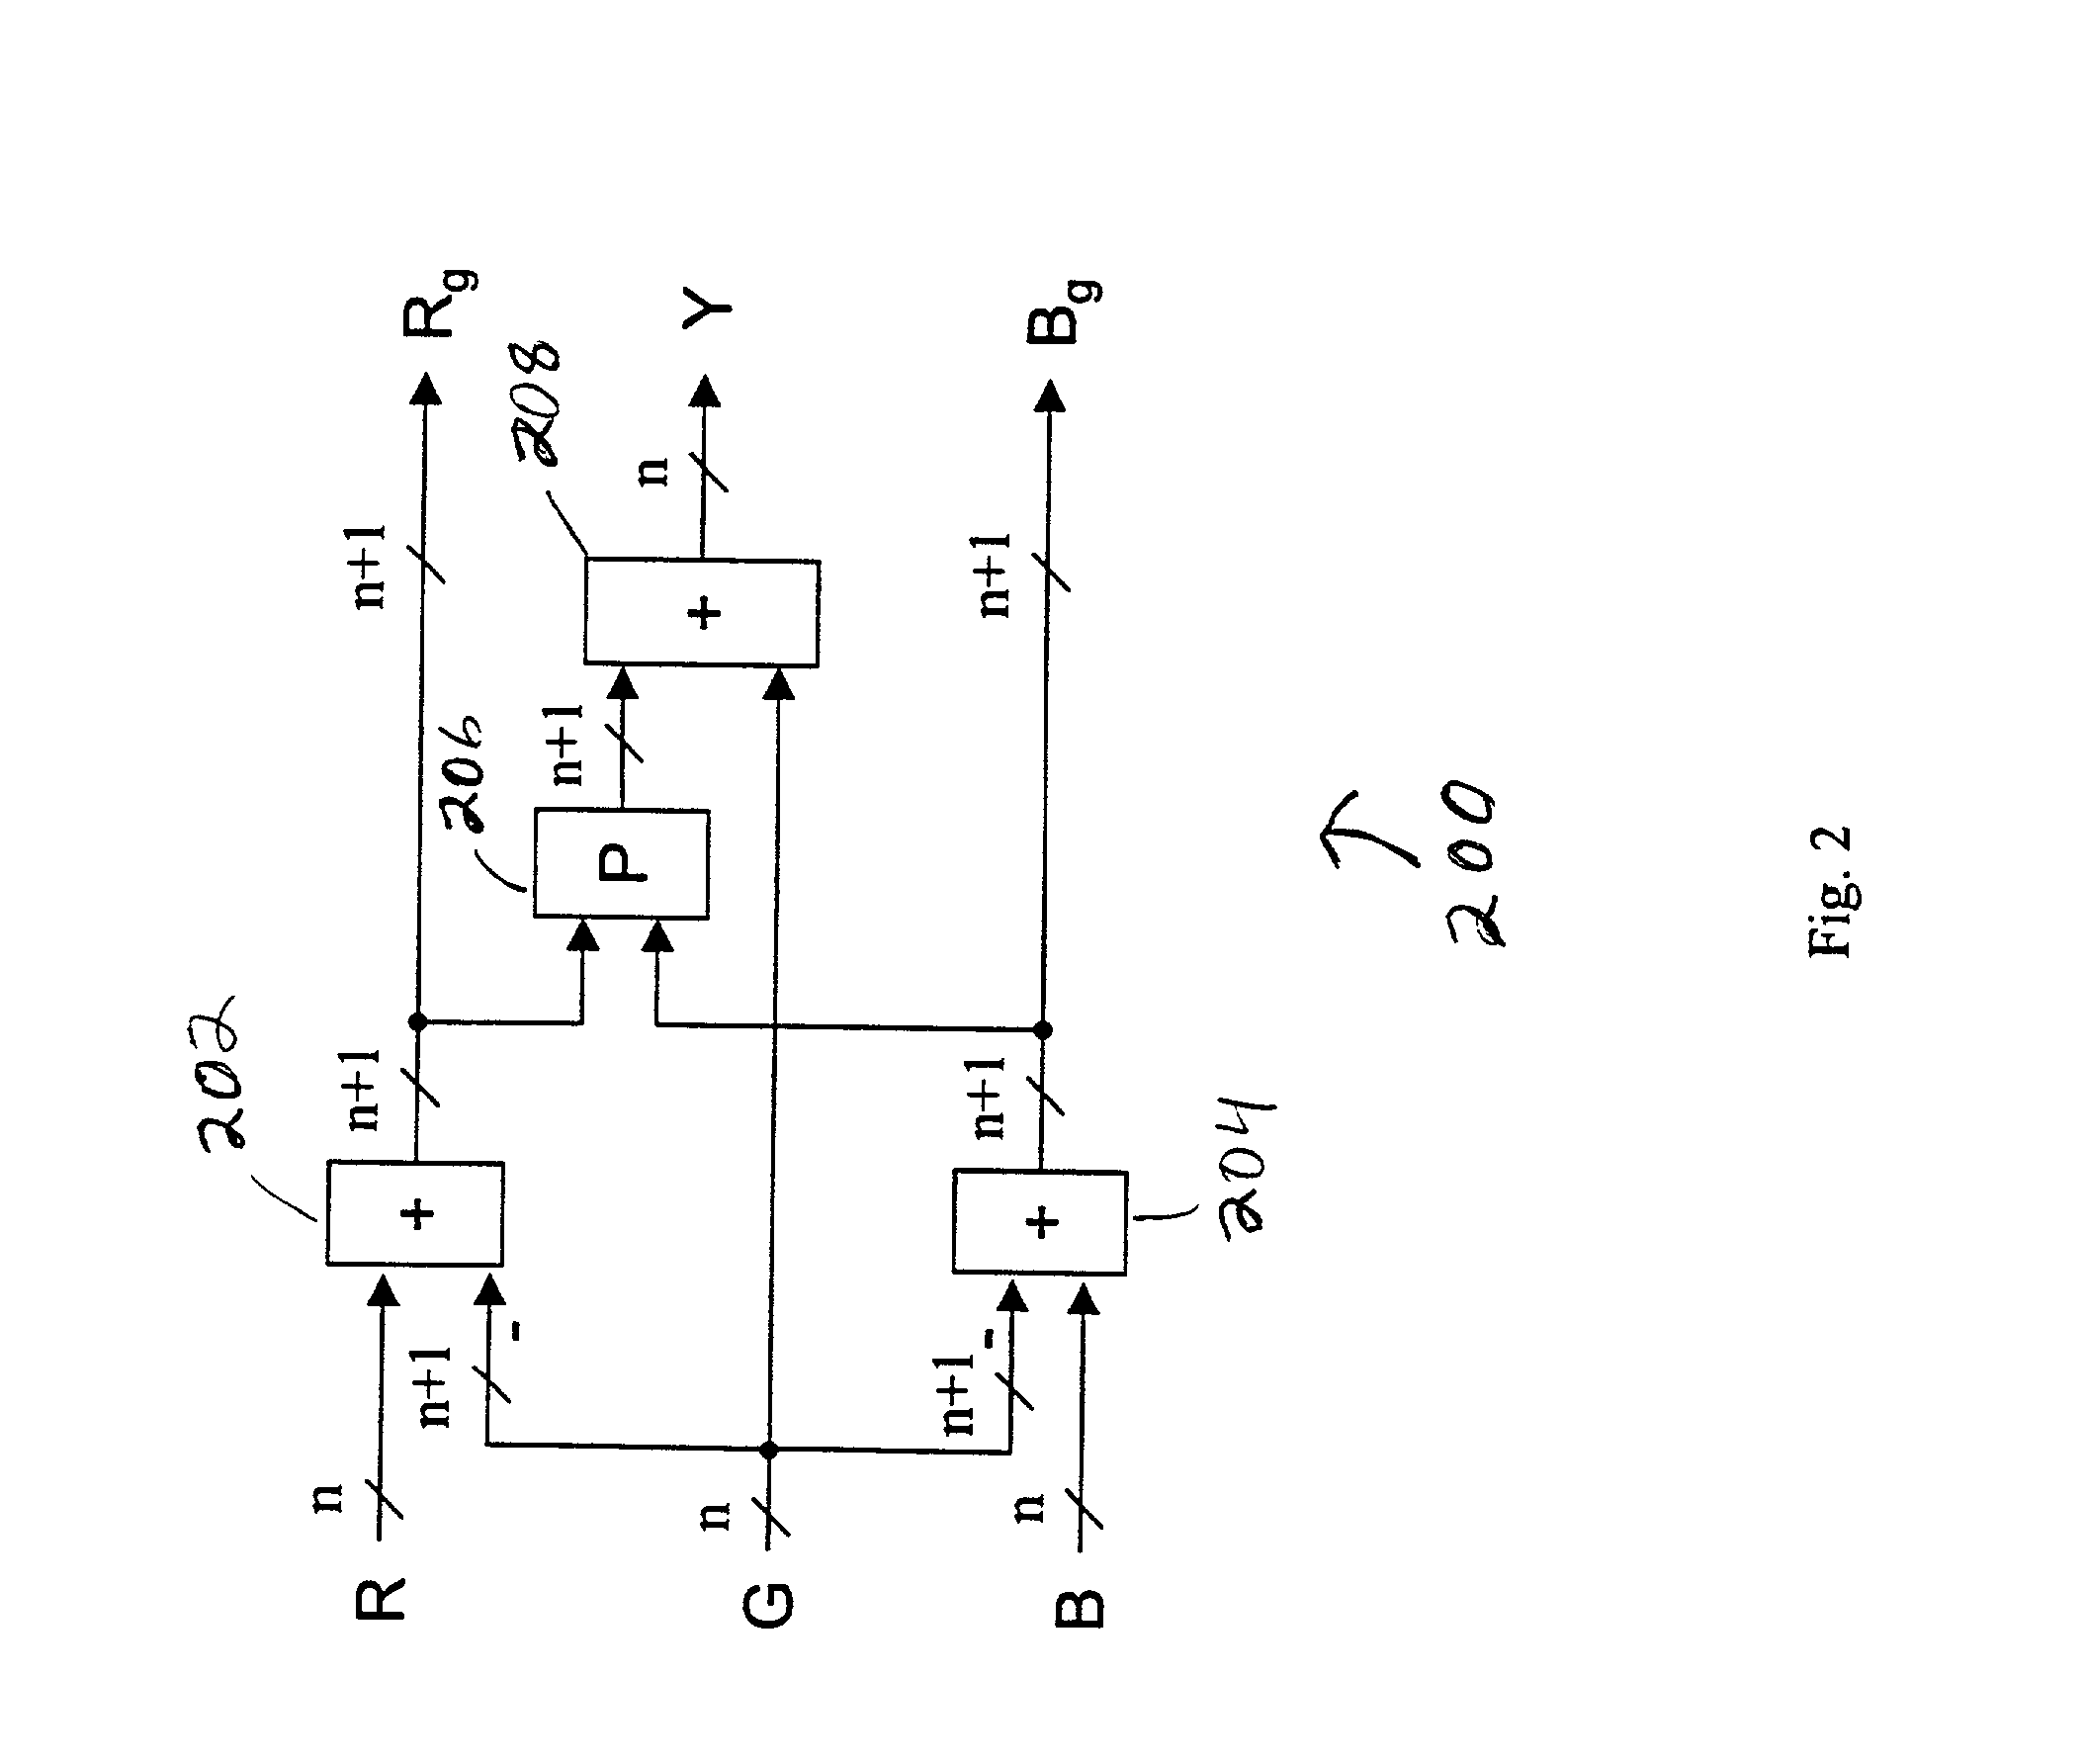 Method and apparatus for RGB color conversion that can be used in conjunction with lossless and lossy image compression